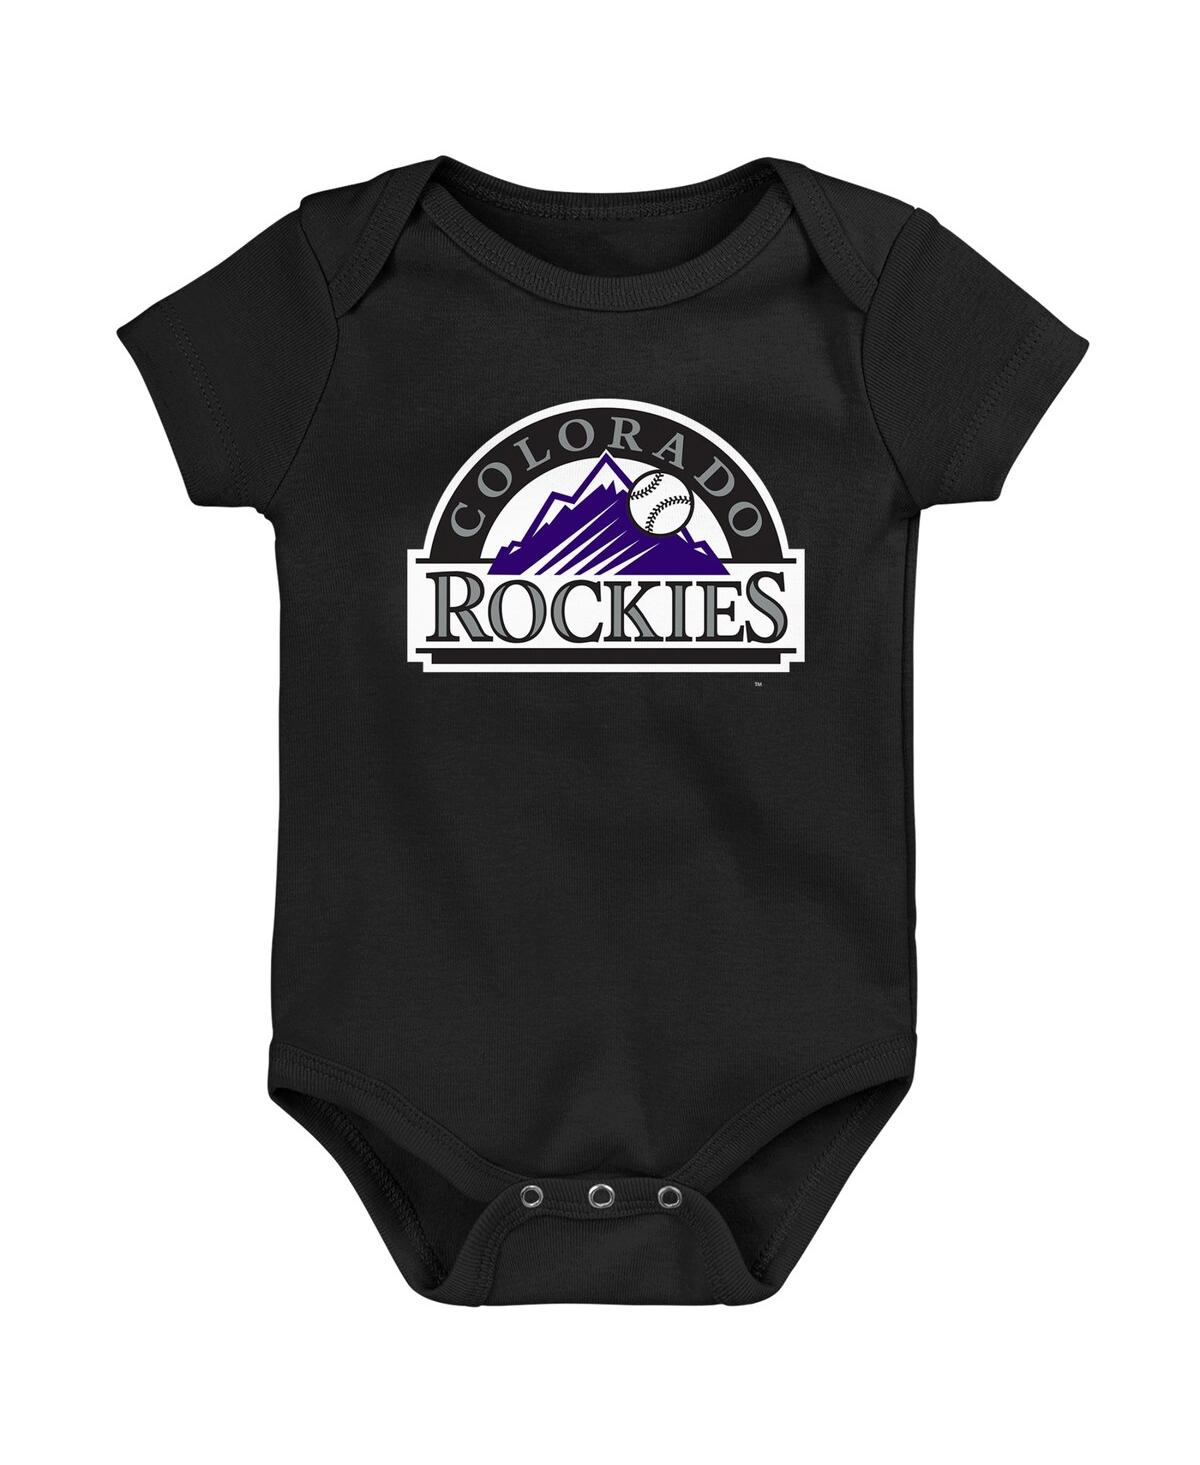 Outerstuff Babies' Newborn And Infant Boys And Girls Black Colorado Rockies Primary Team Logo Bodysuit